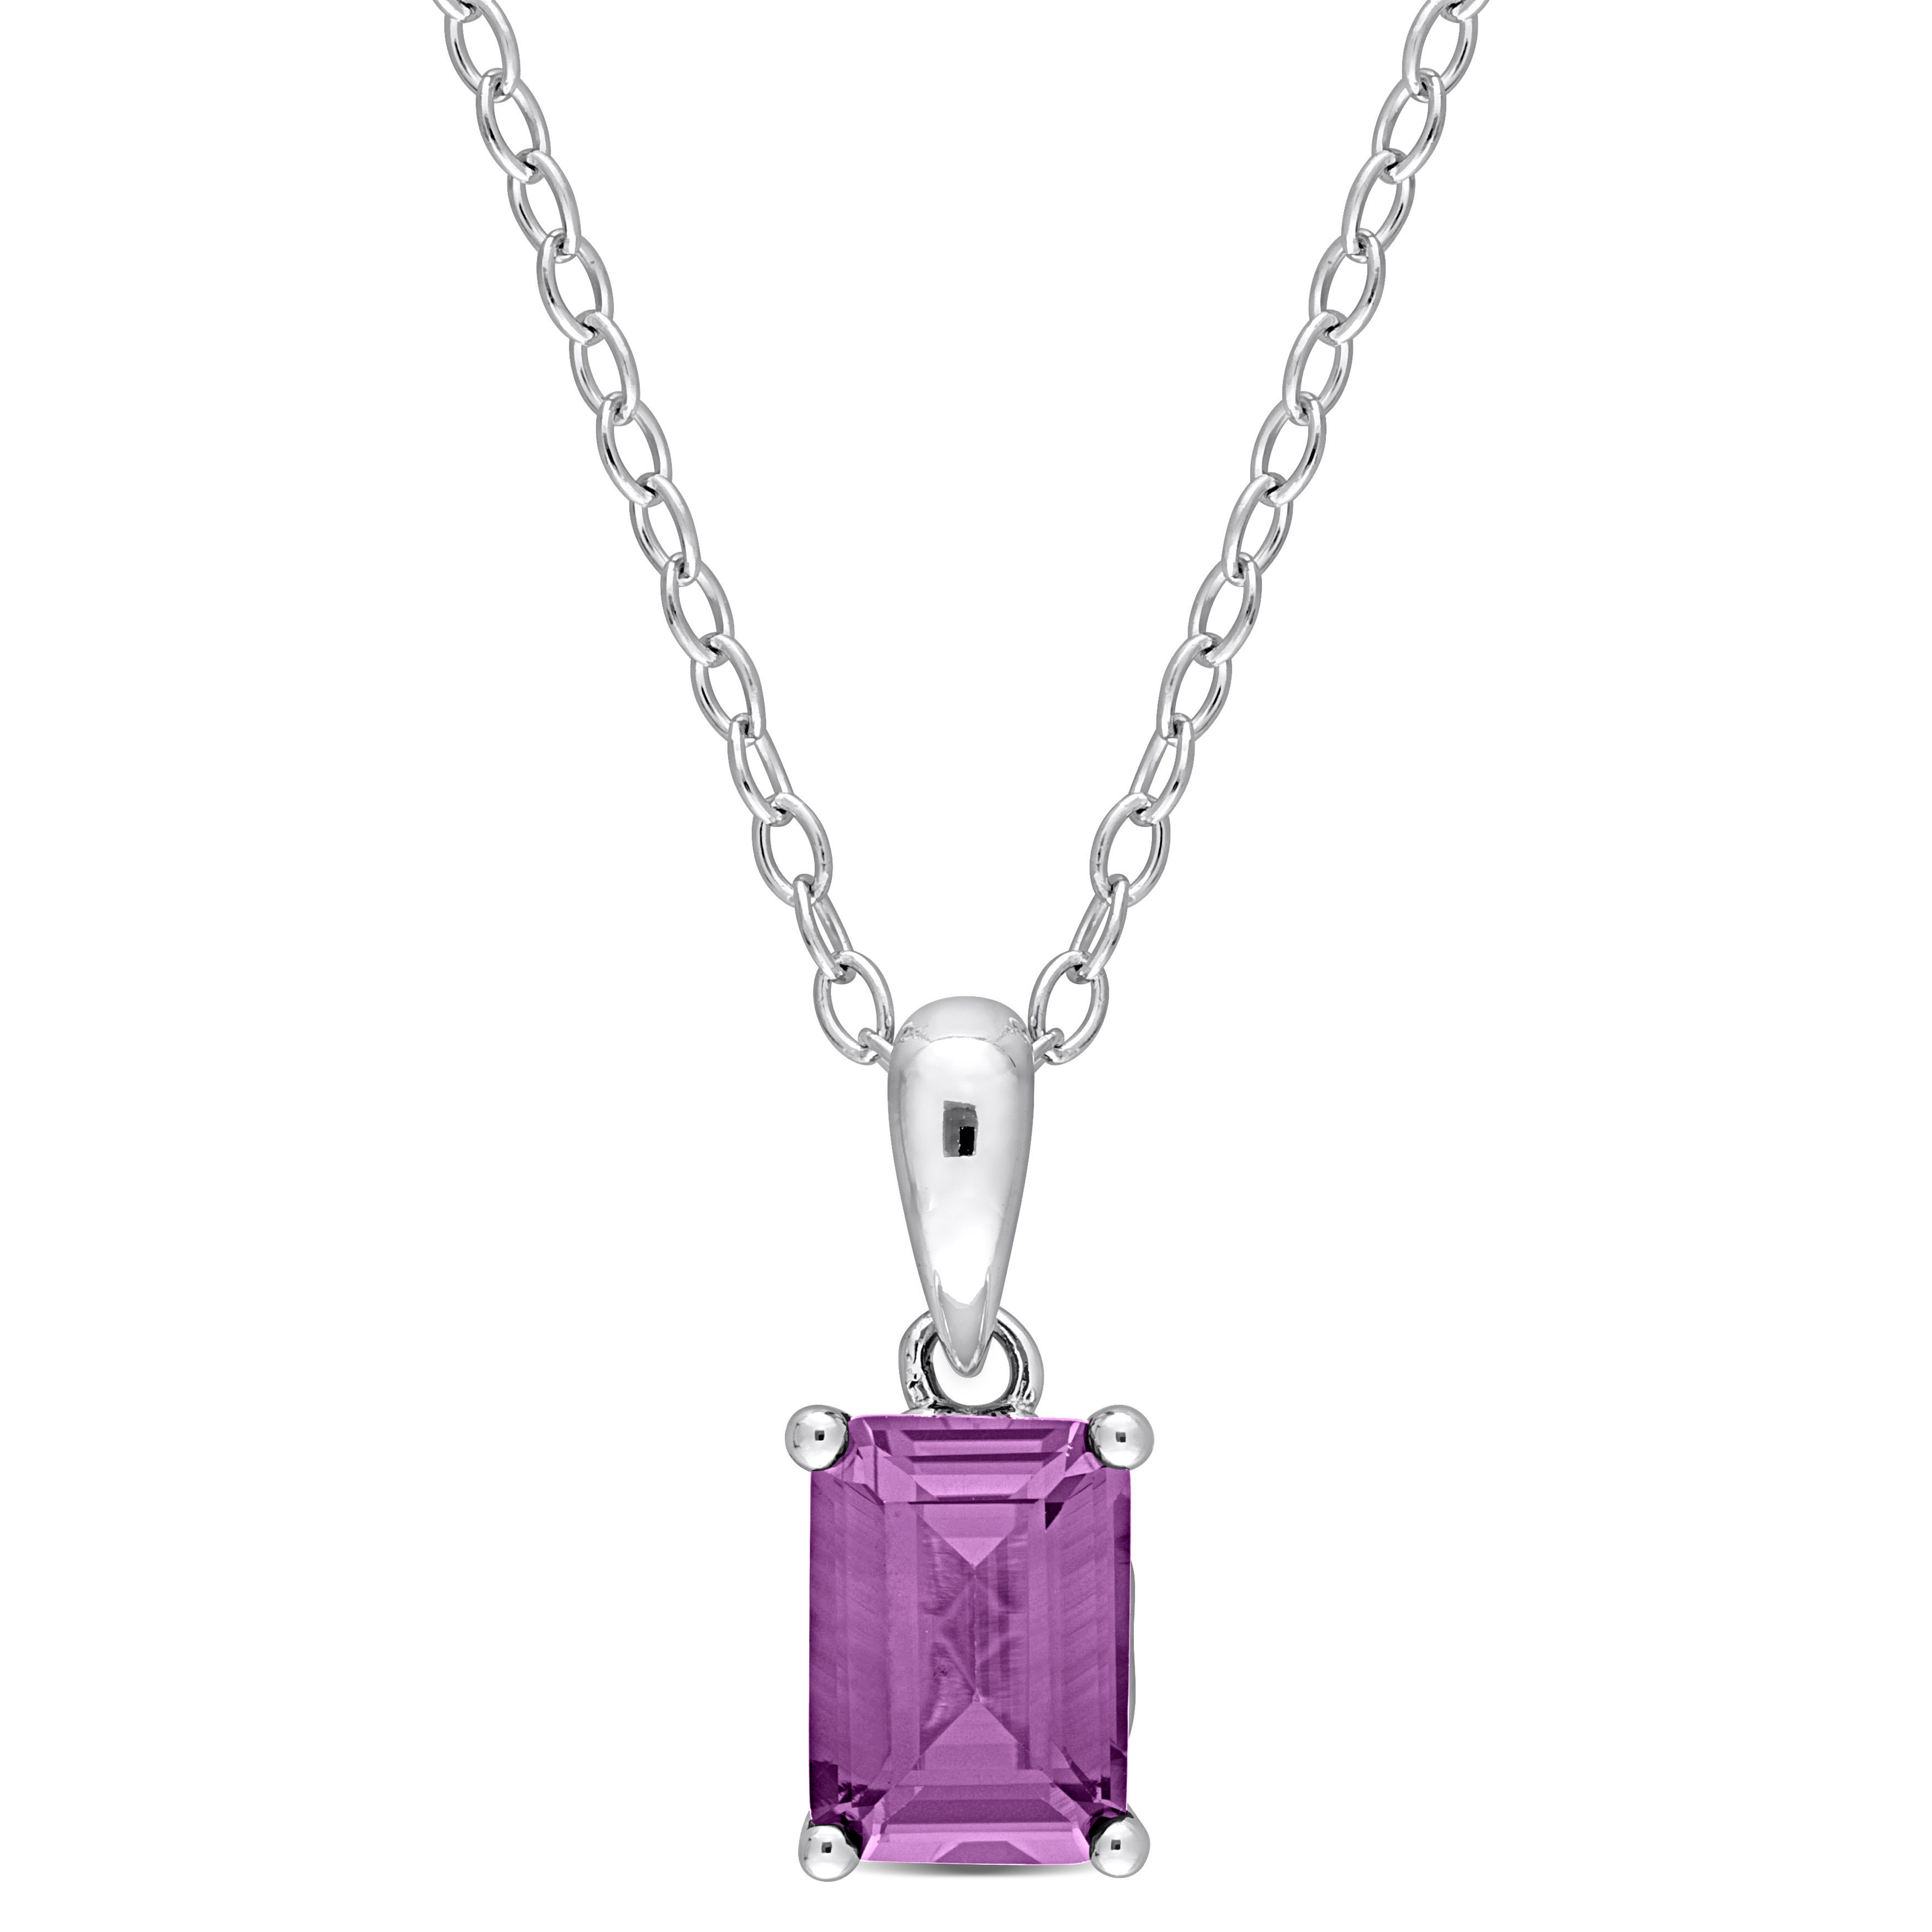 1 1/2 CT TGW Emerald Cut Simulated Alexandrite Solitaire Heart Design Pendant with Chain in Sterling Silver - 18 in.